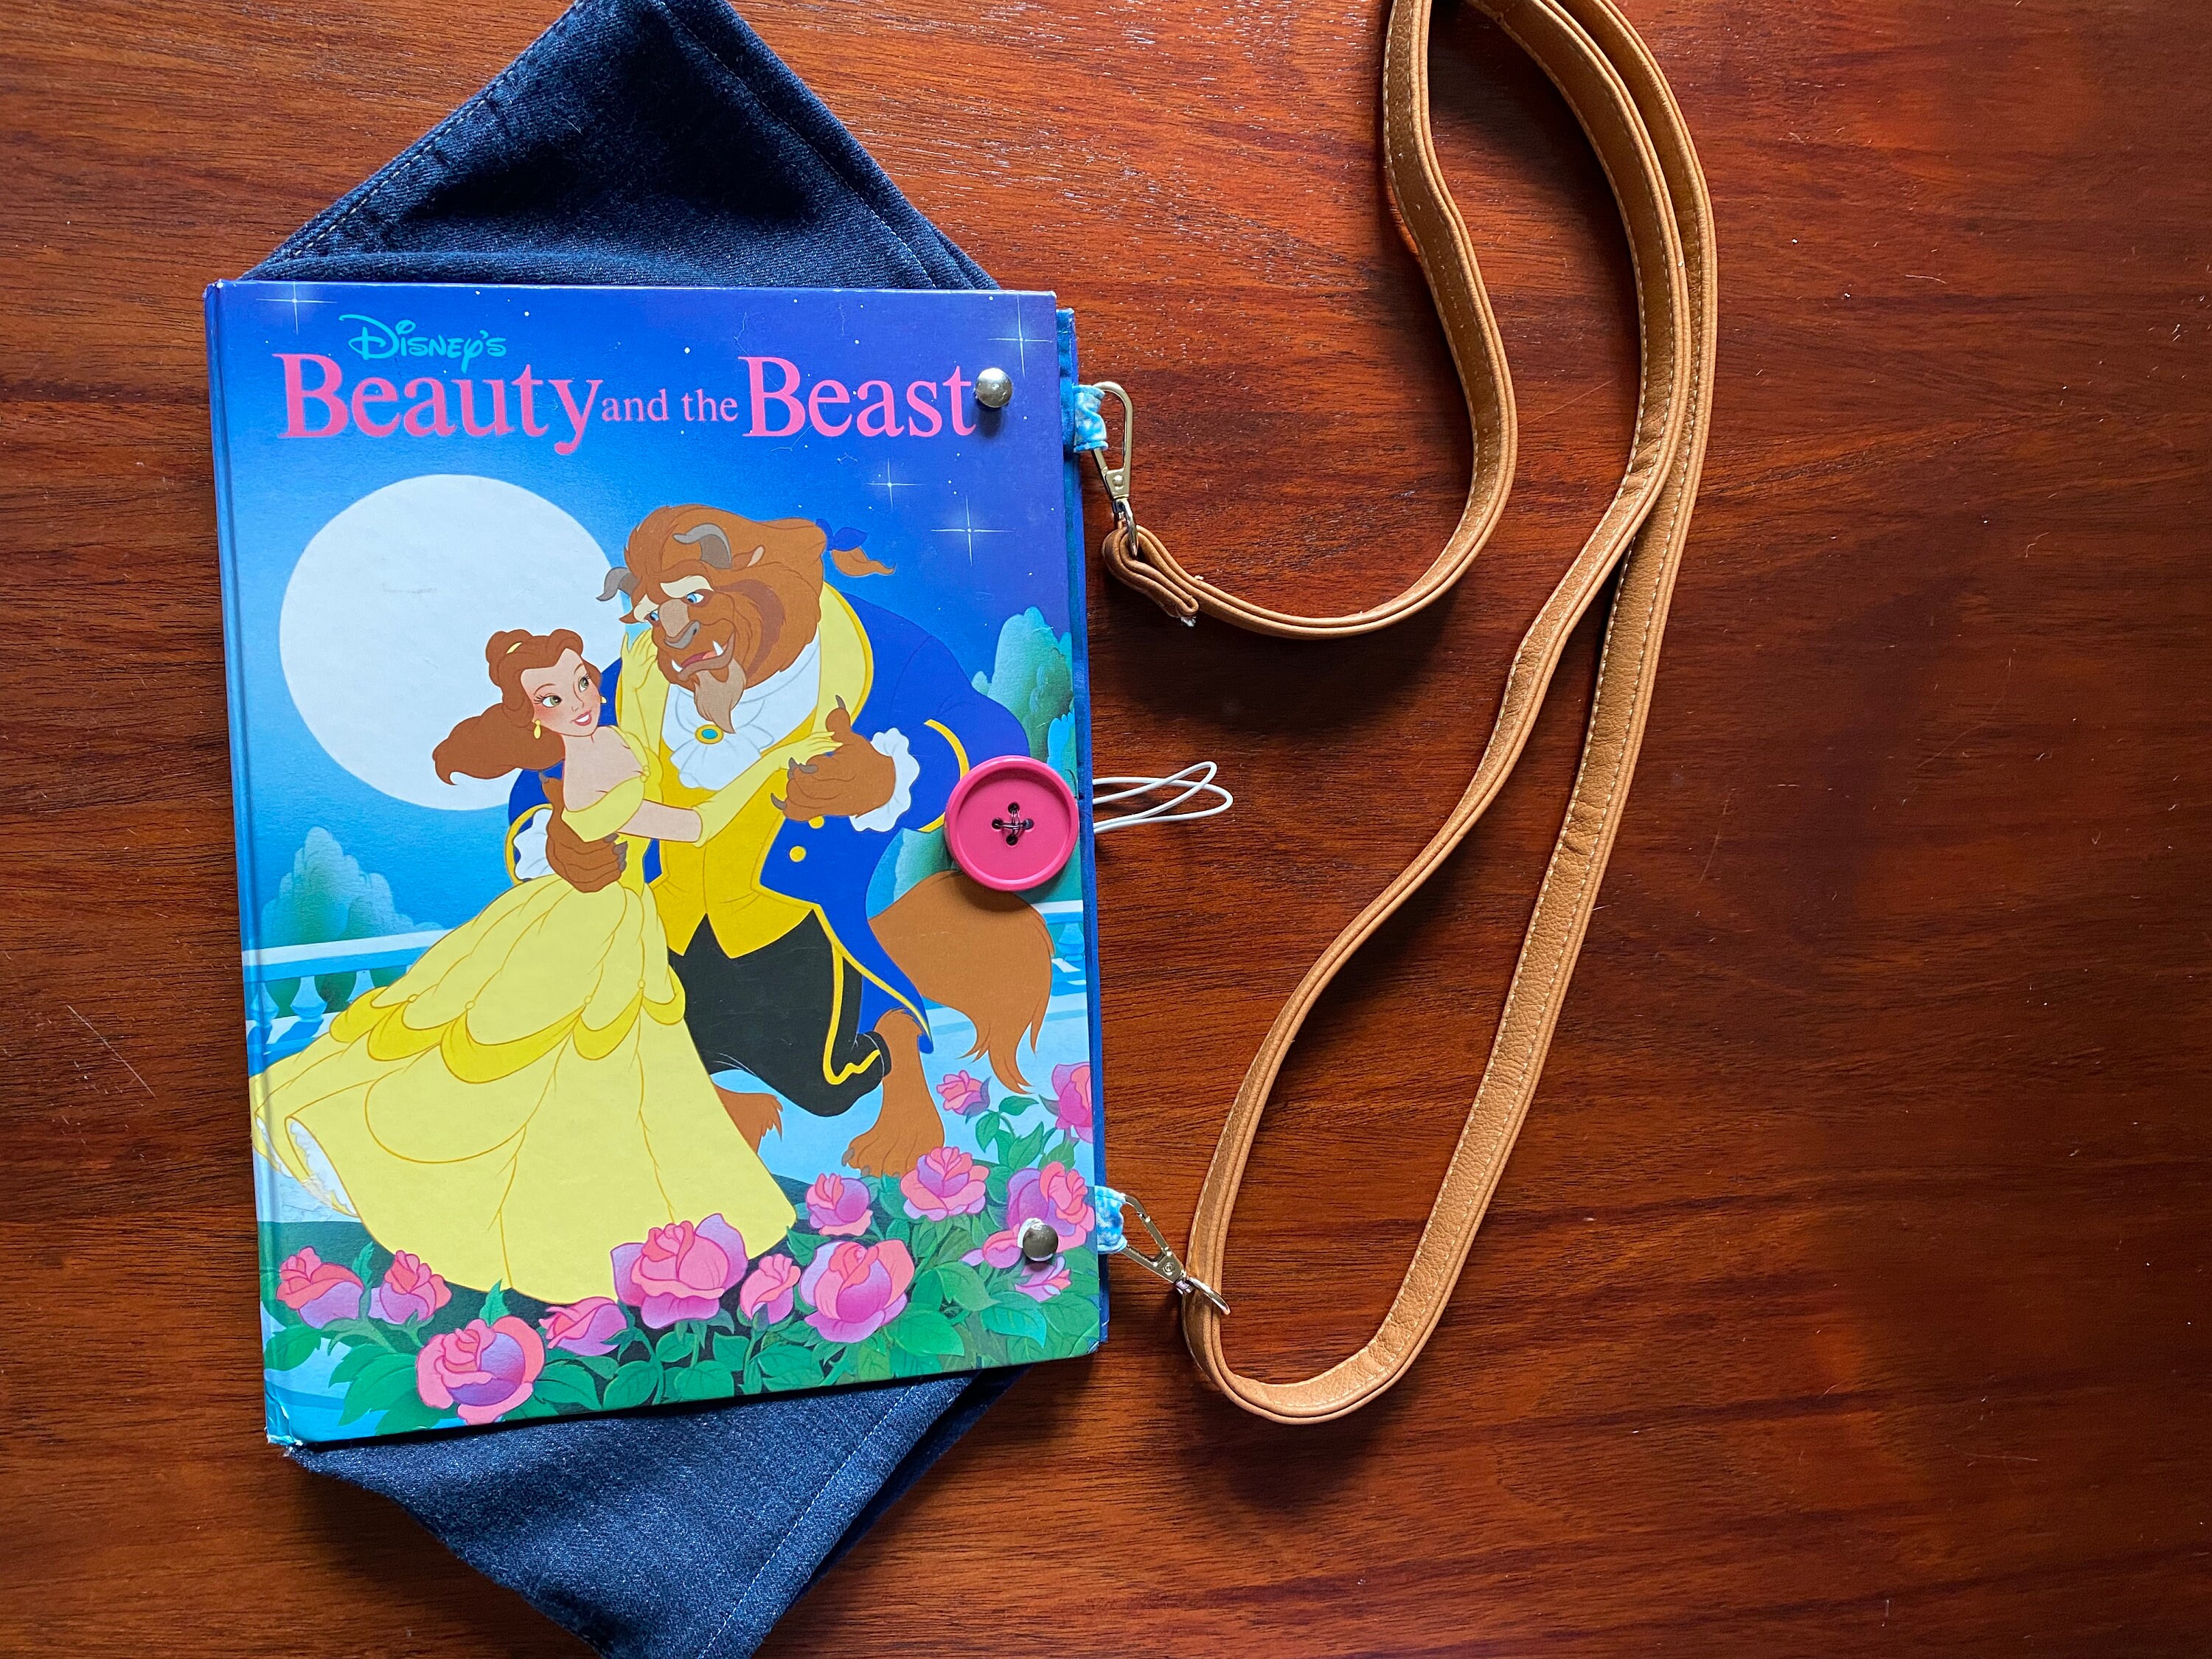 Book Lover Gift Beauty and the Beast Book Purse Book Bag 